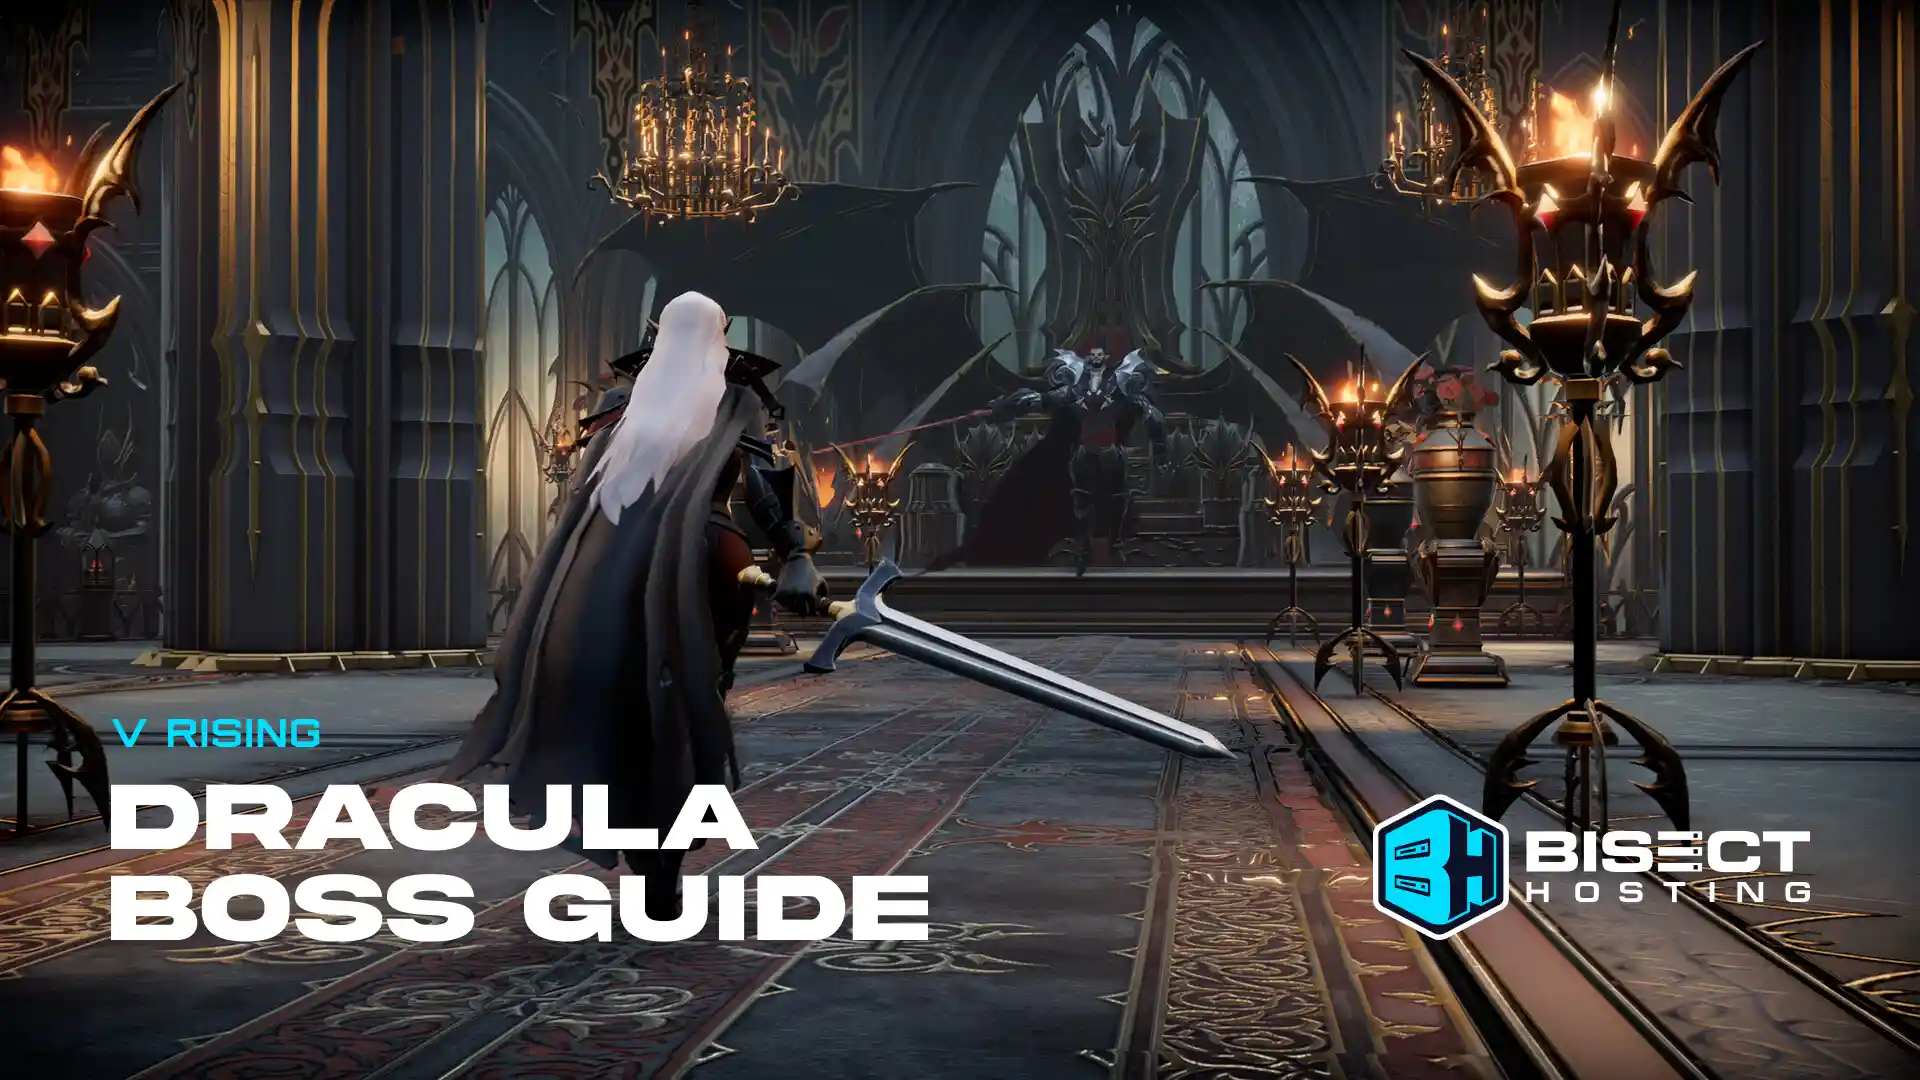 V Rising Dracula Boss Guide: Location, Fight Tips, & Loot Table